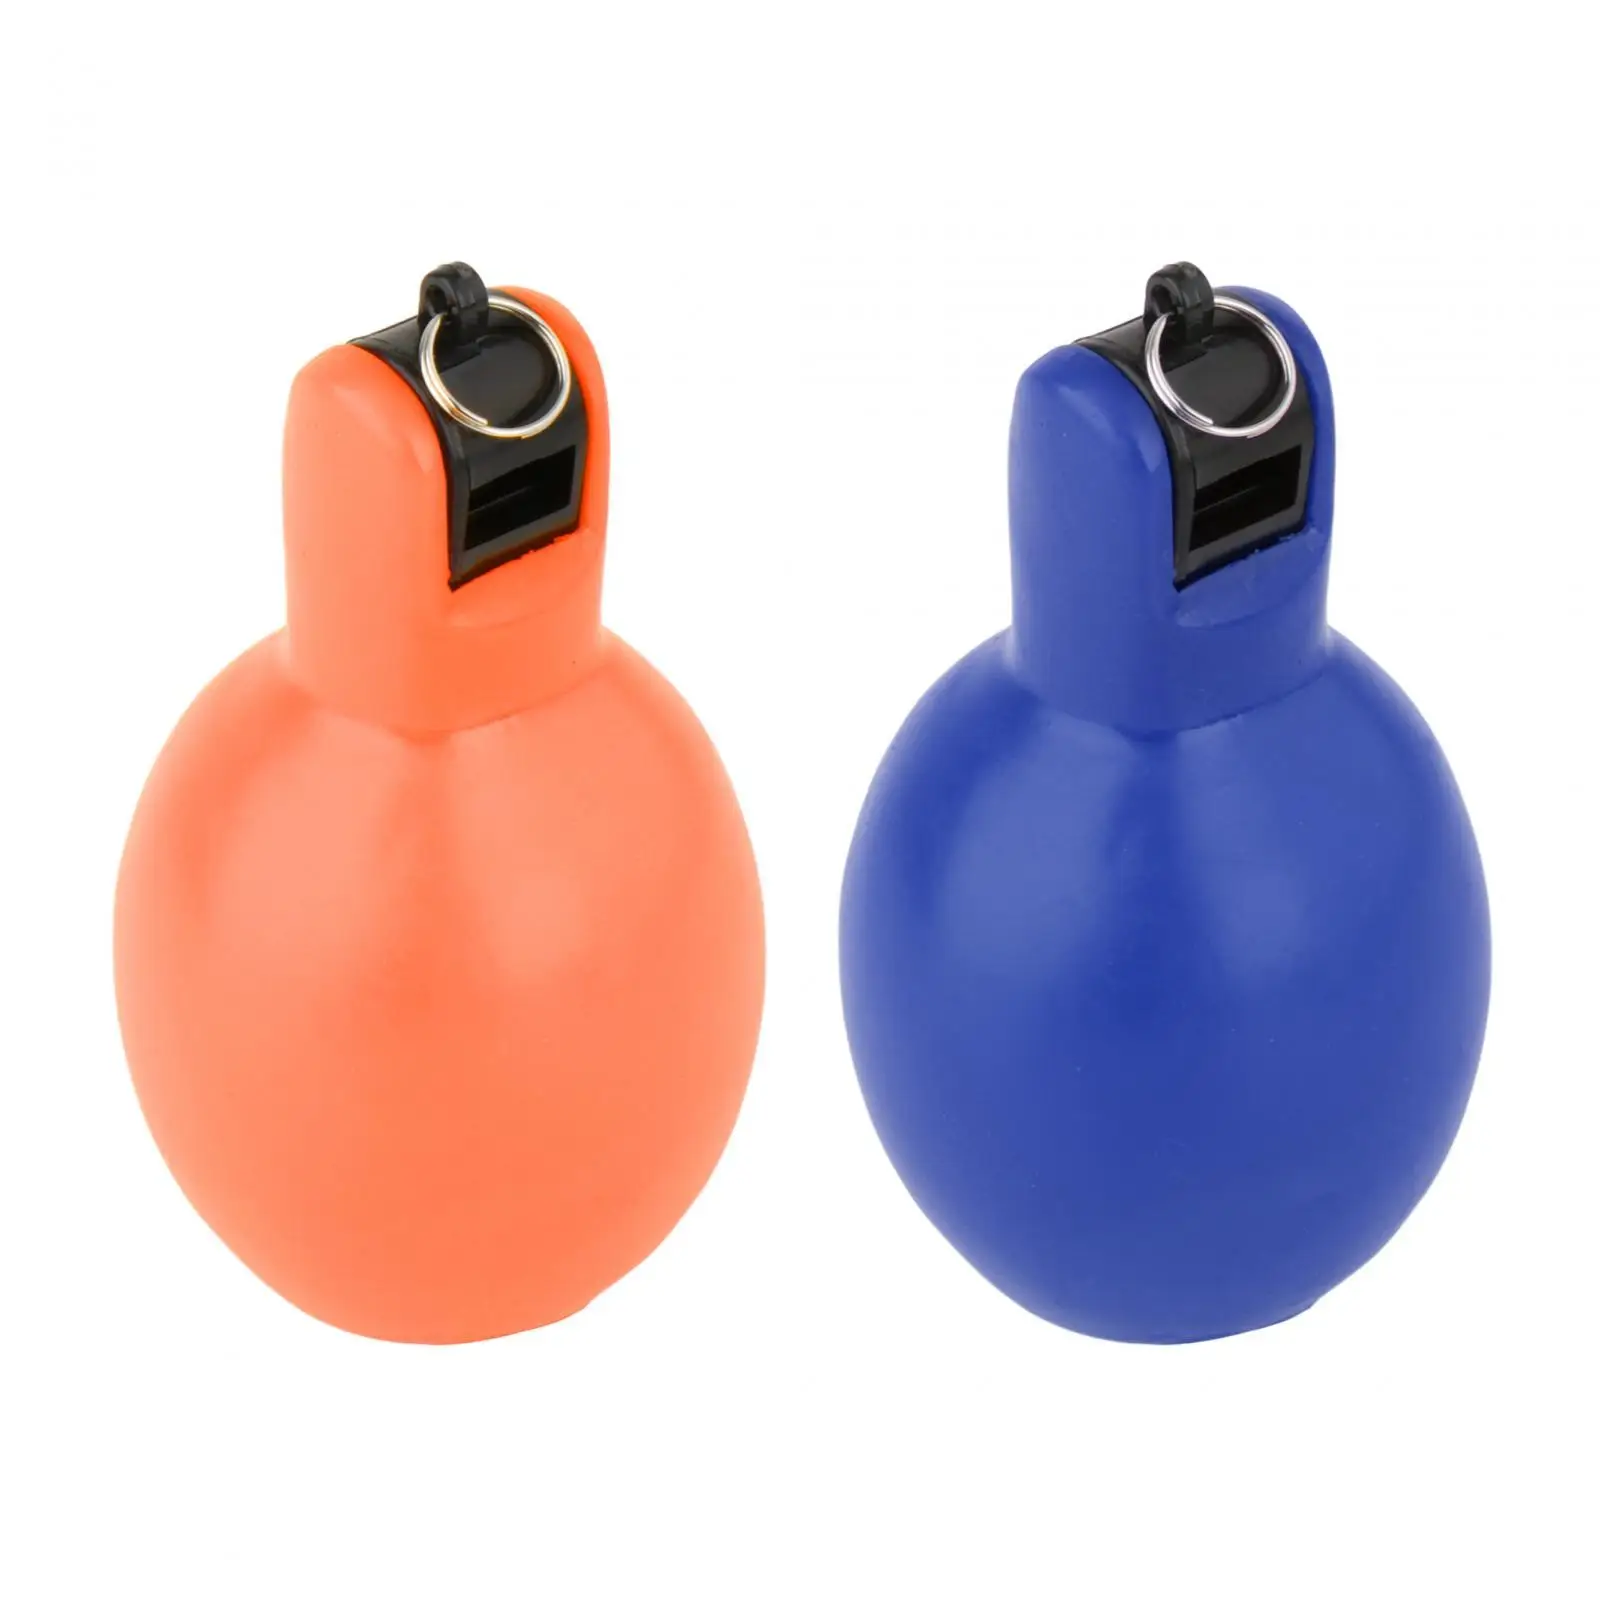 2x Hand Squeeze Whistles Manual Trainer Whistle for Camping Trekking Walking